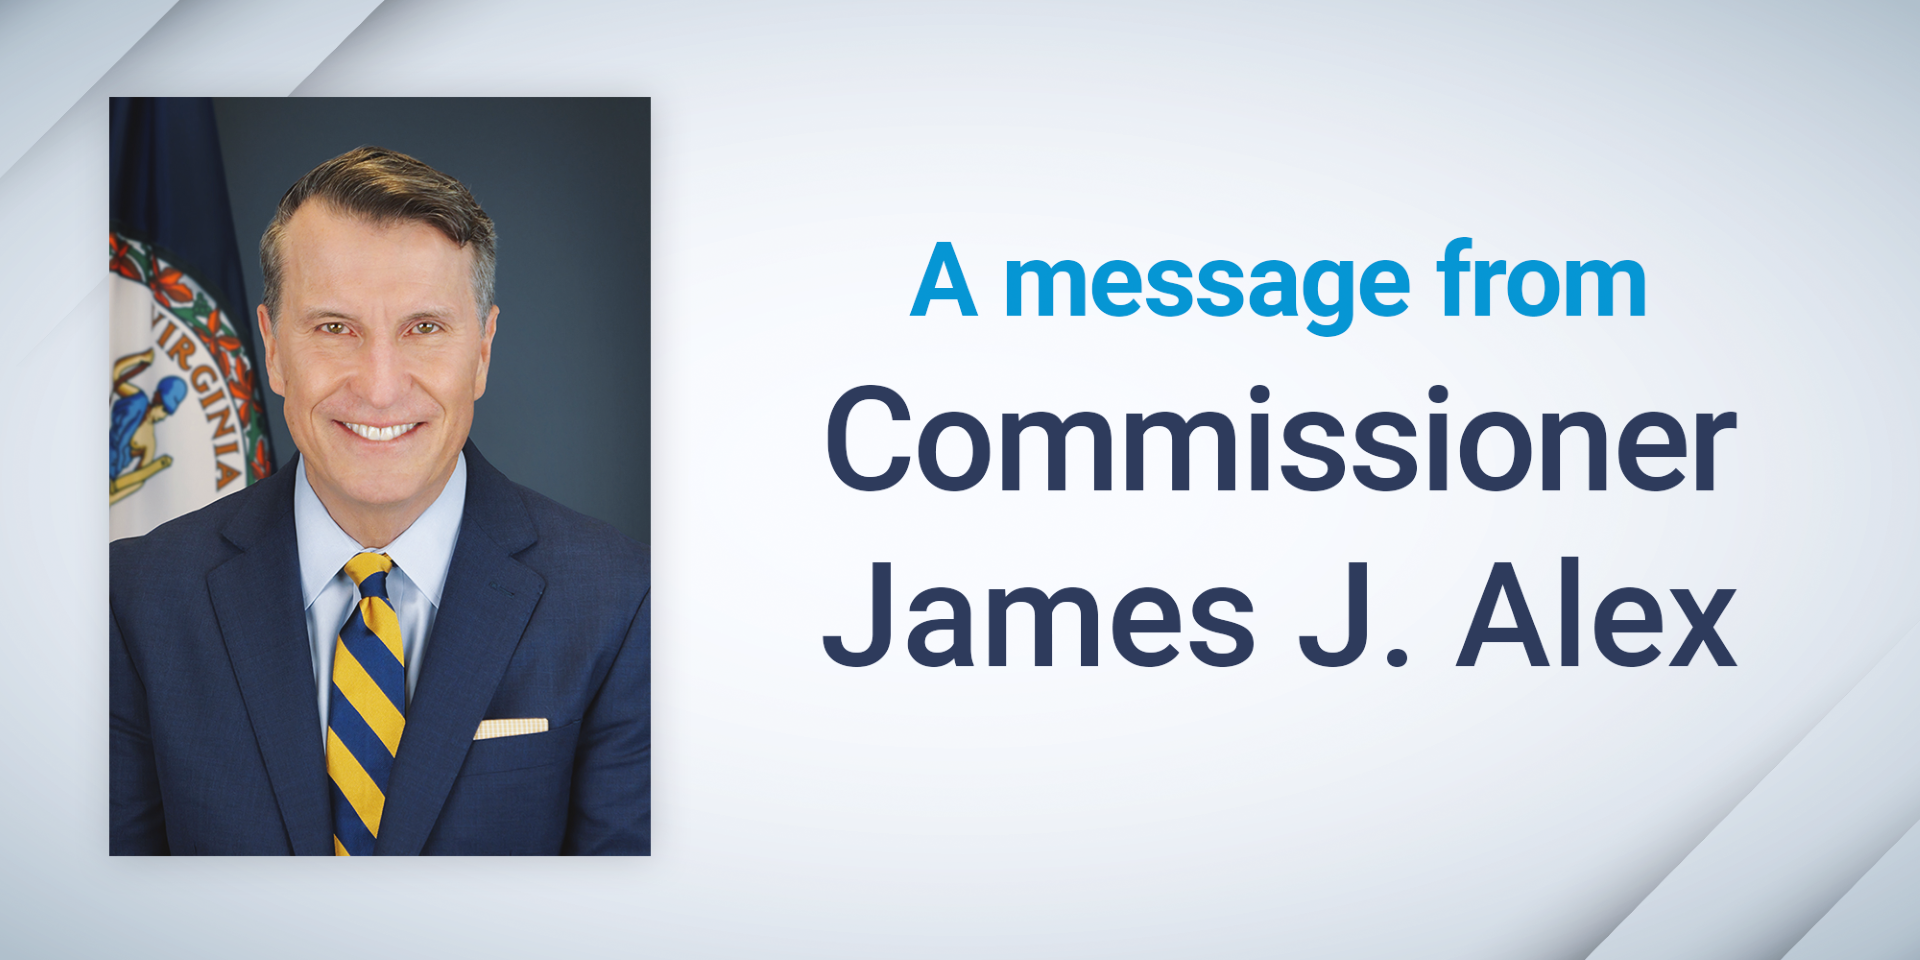 photo of Commissioner Alex with text "A message from Commissioner James J. Alex"